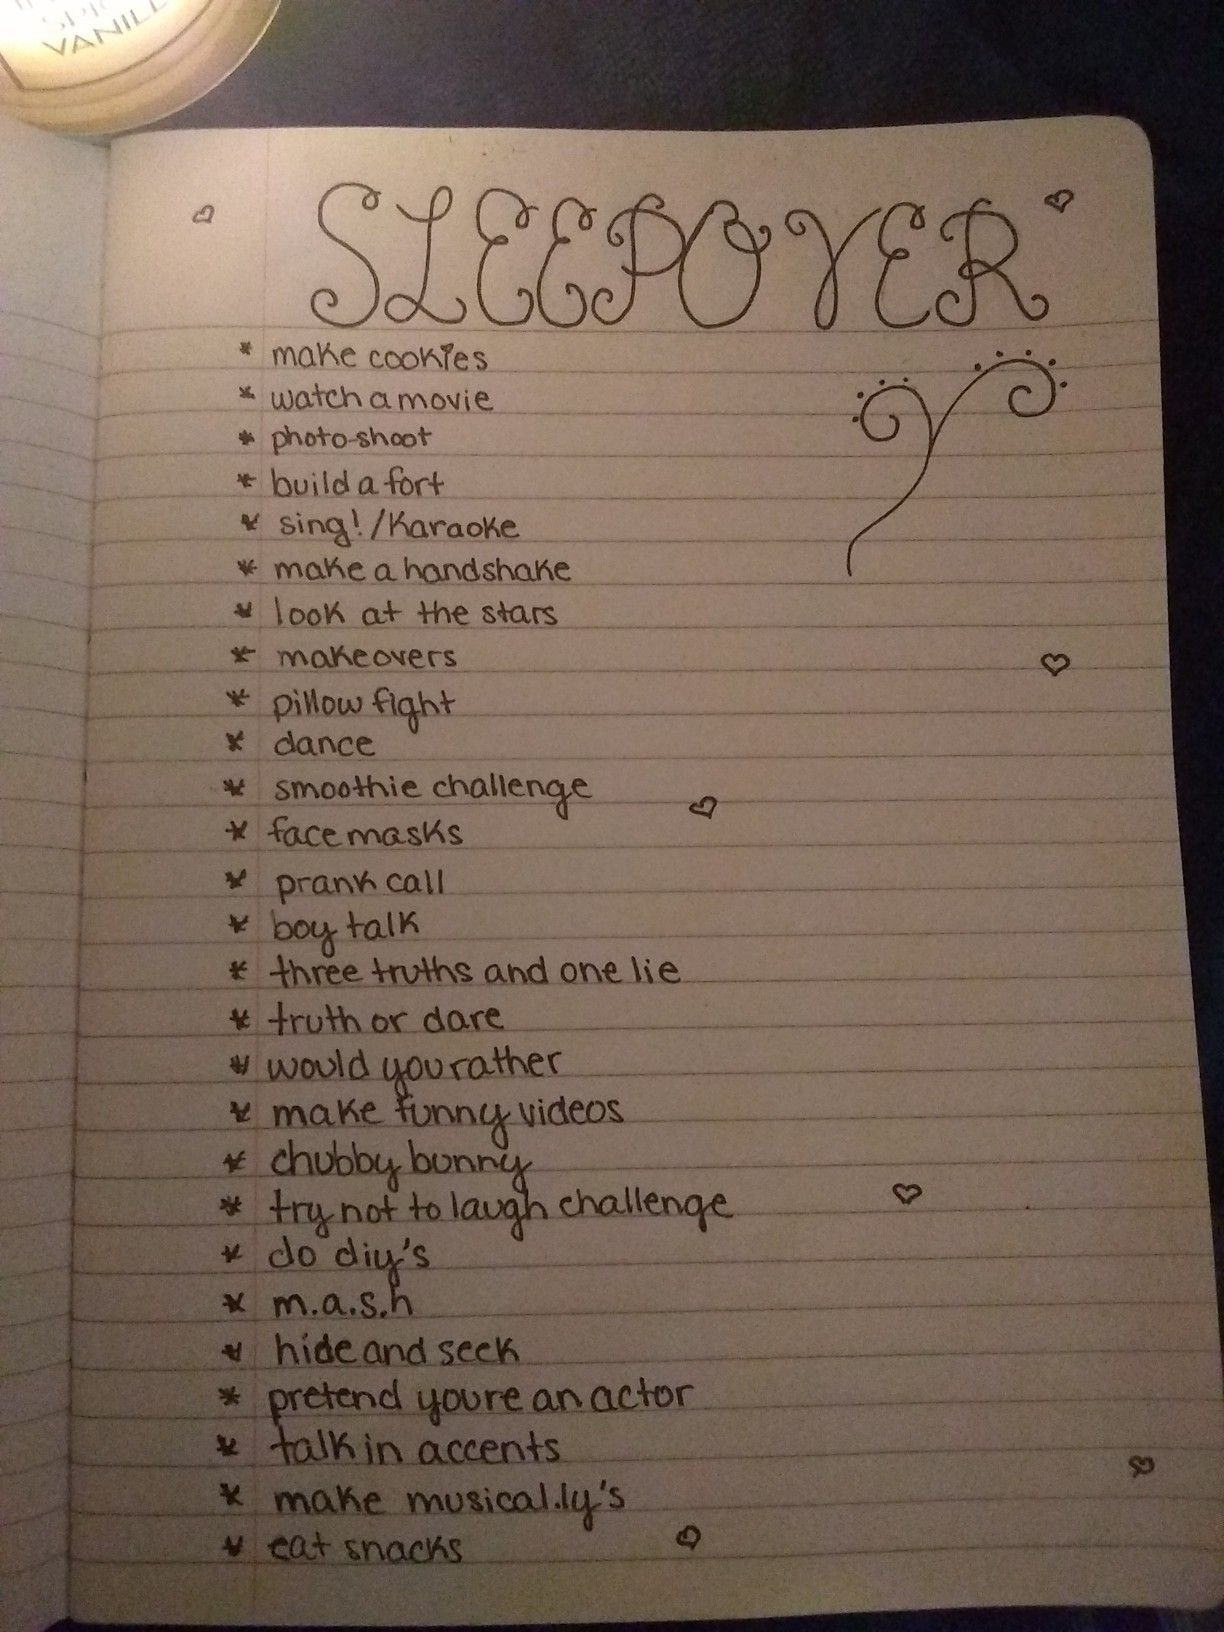 10 Famous Ideas For Things To Do ideas for things to do at a sleepover sleepoverideas sleepover 1 2023